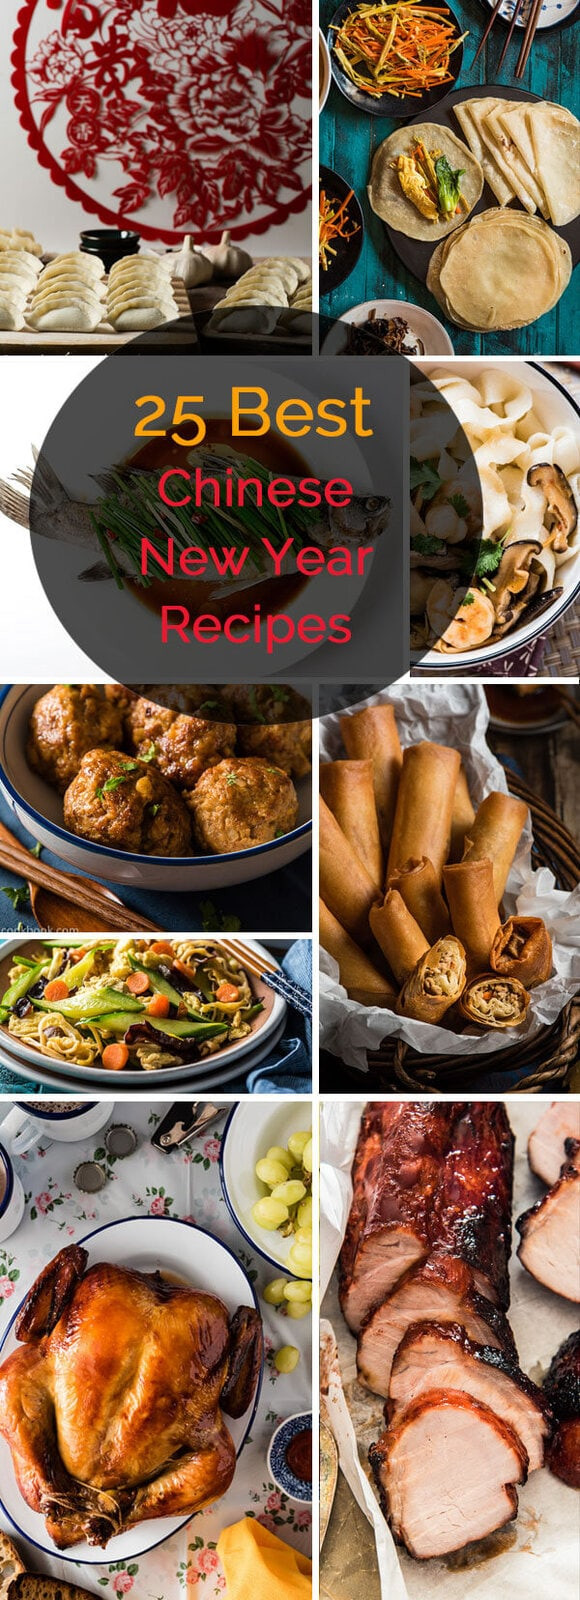 Chinese New Year Dishes Recipes
 Top 25 Chinese New Year Recipes